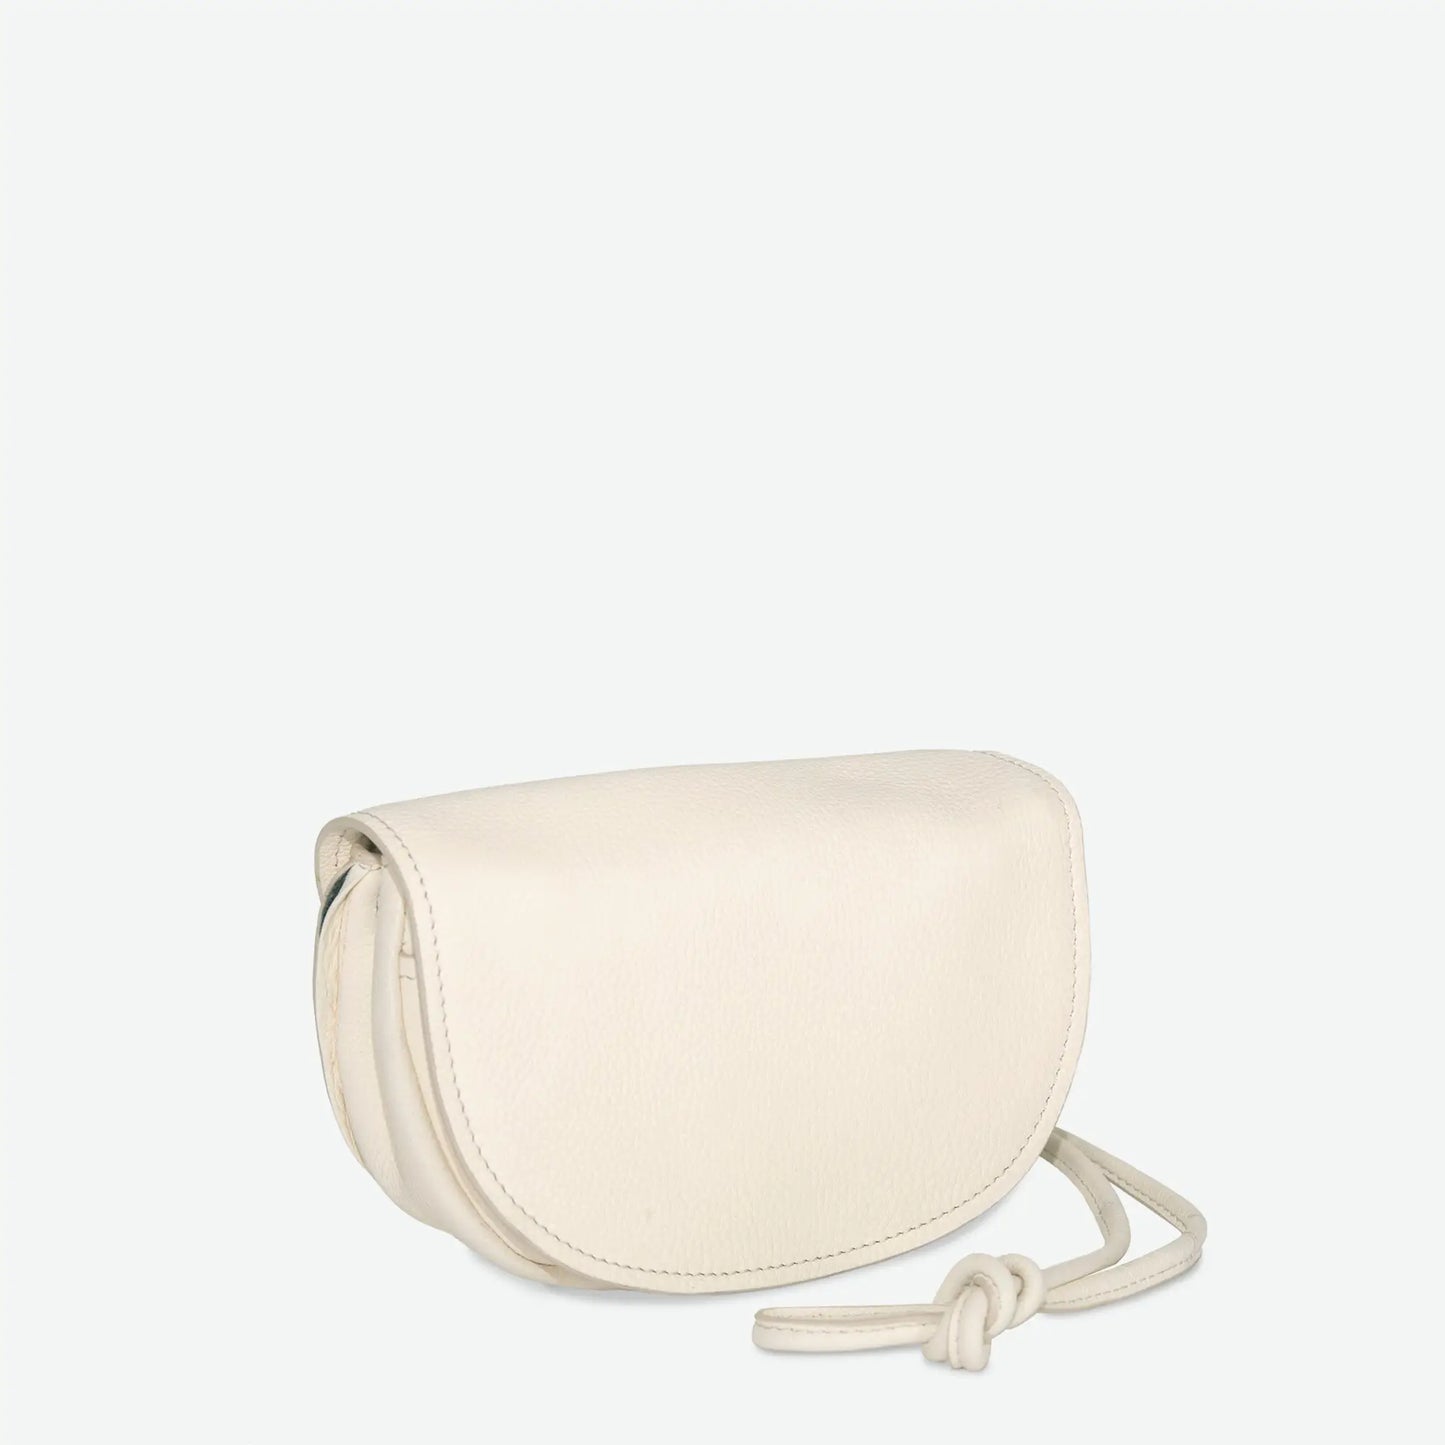 The Little Leather Moon Crossbody Bag in Cream